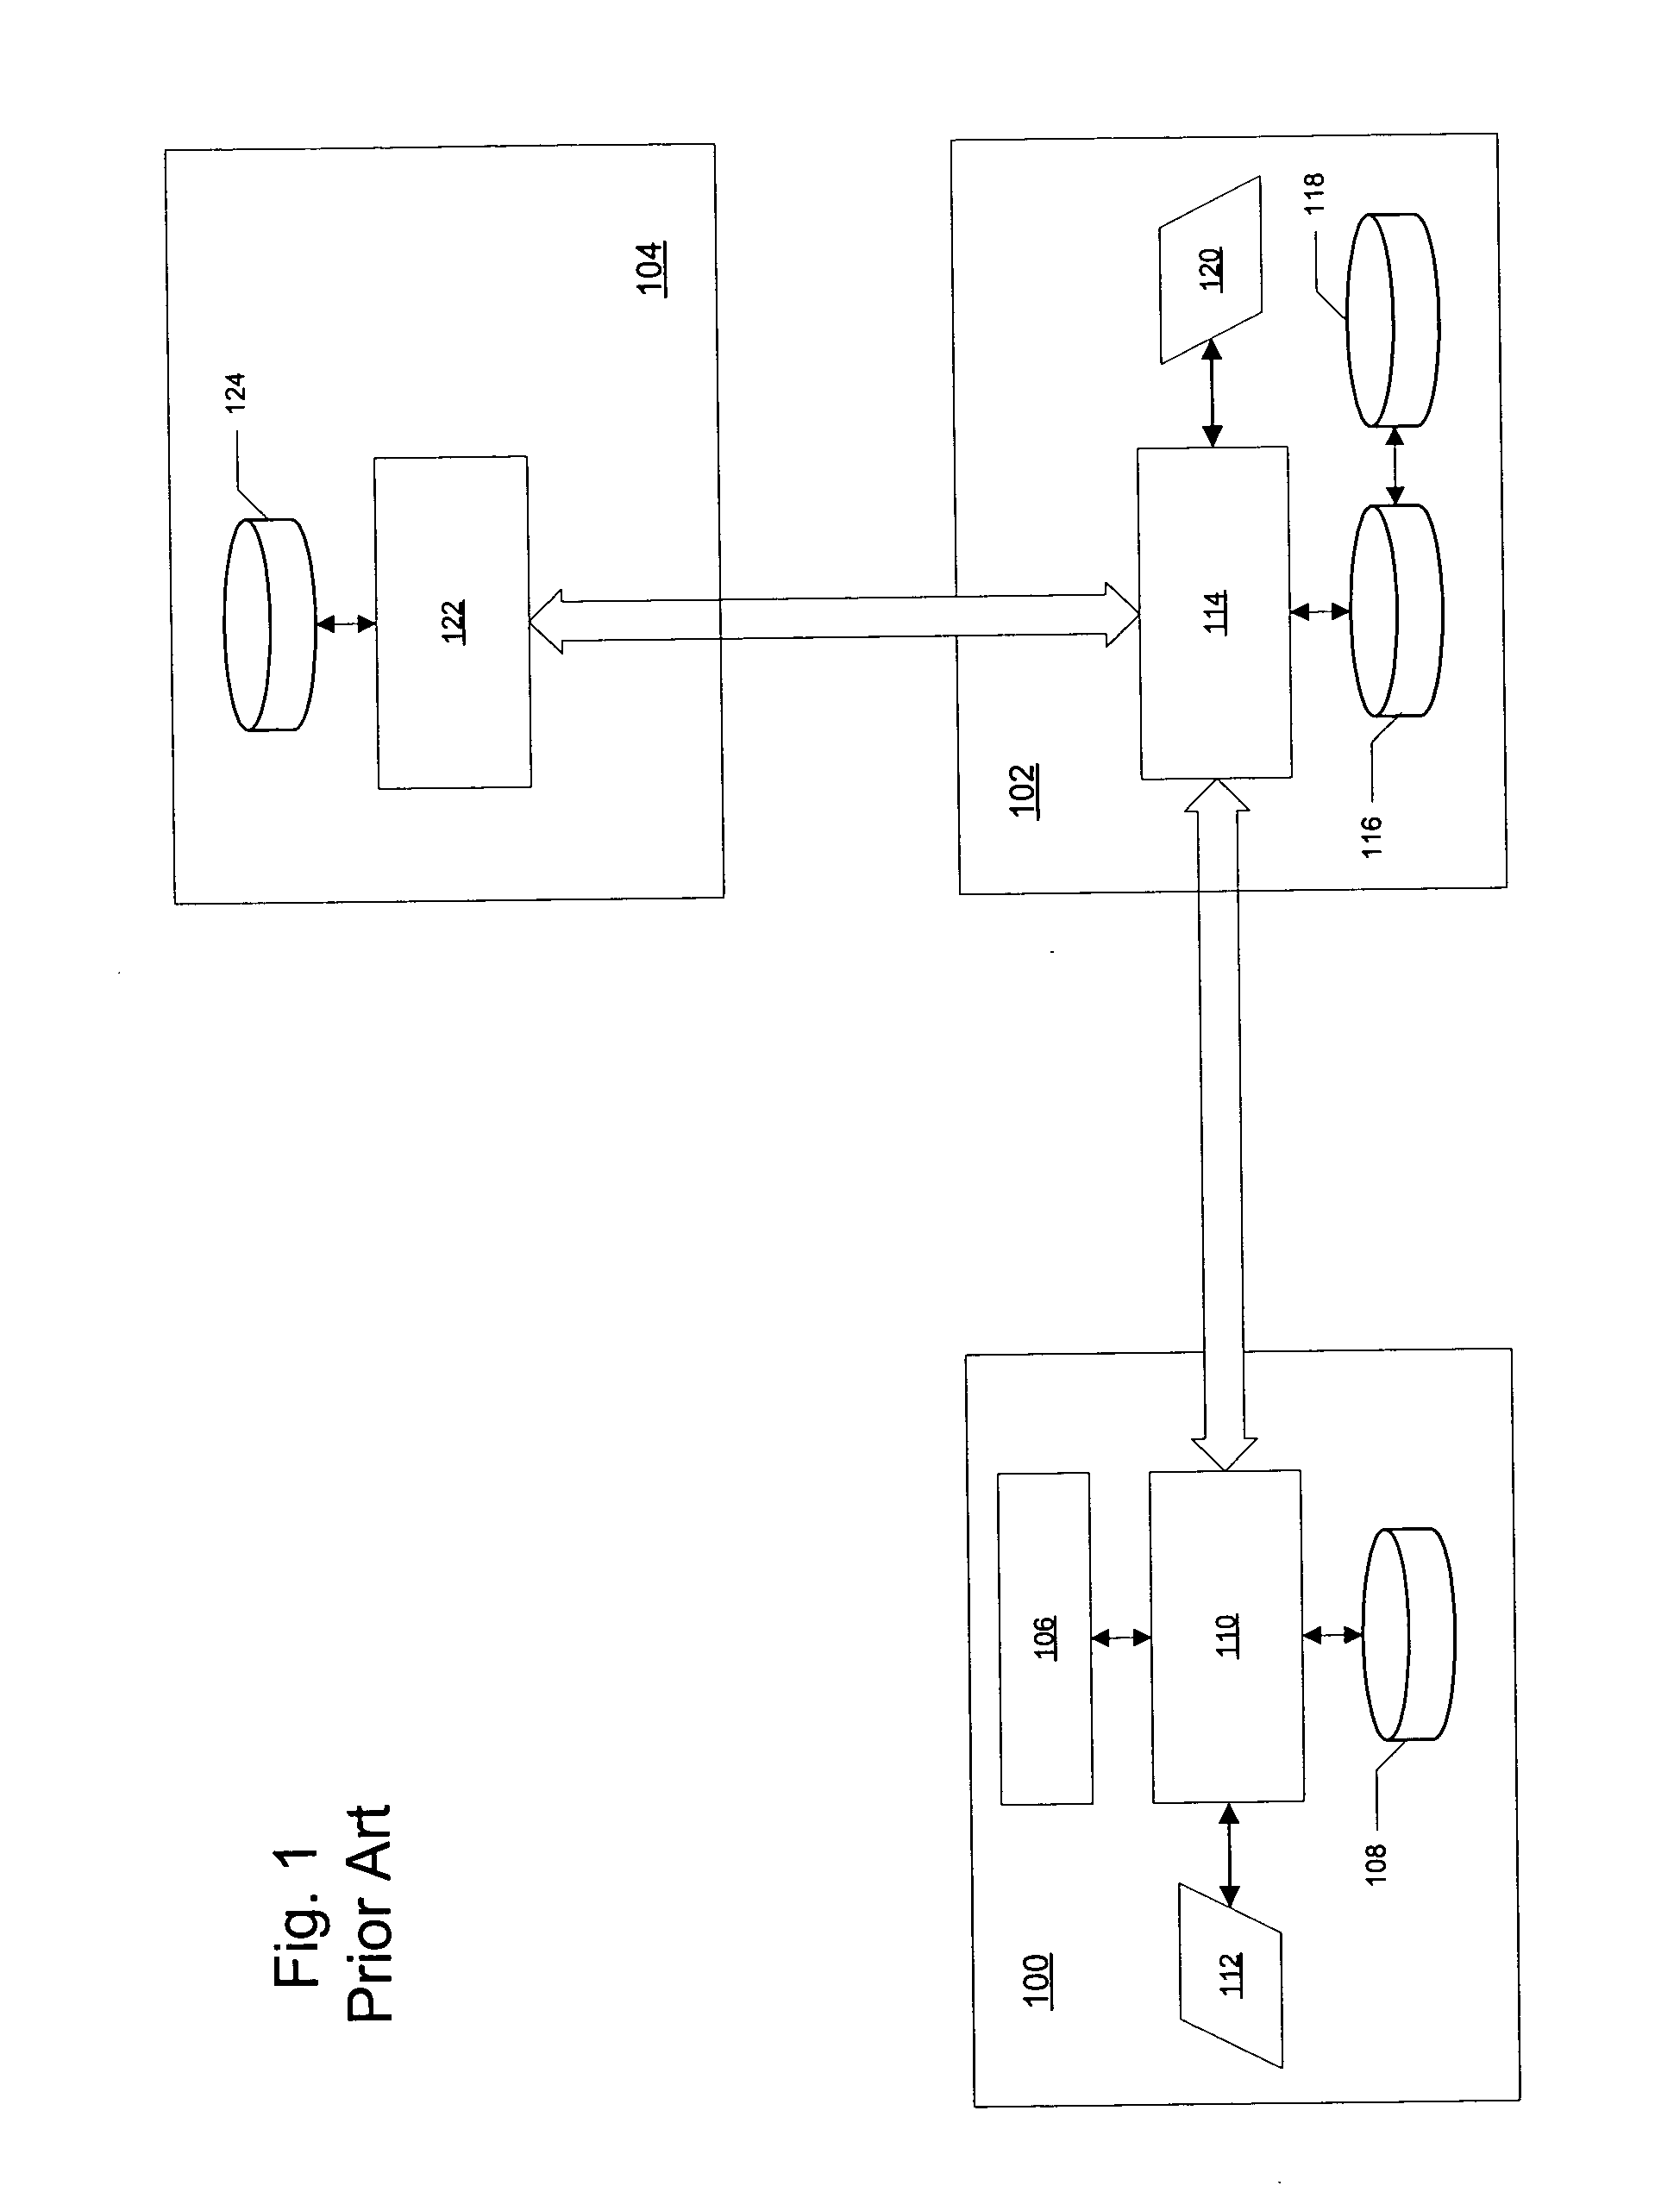 Method and system of providing cascaded replication